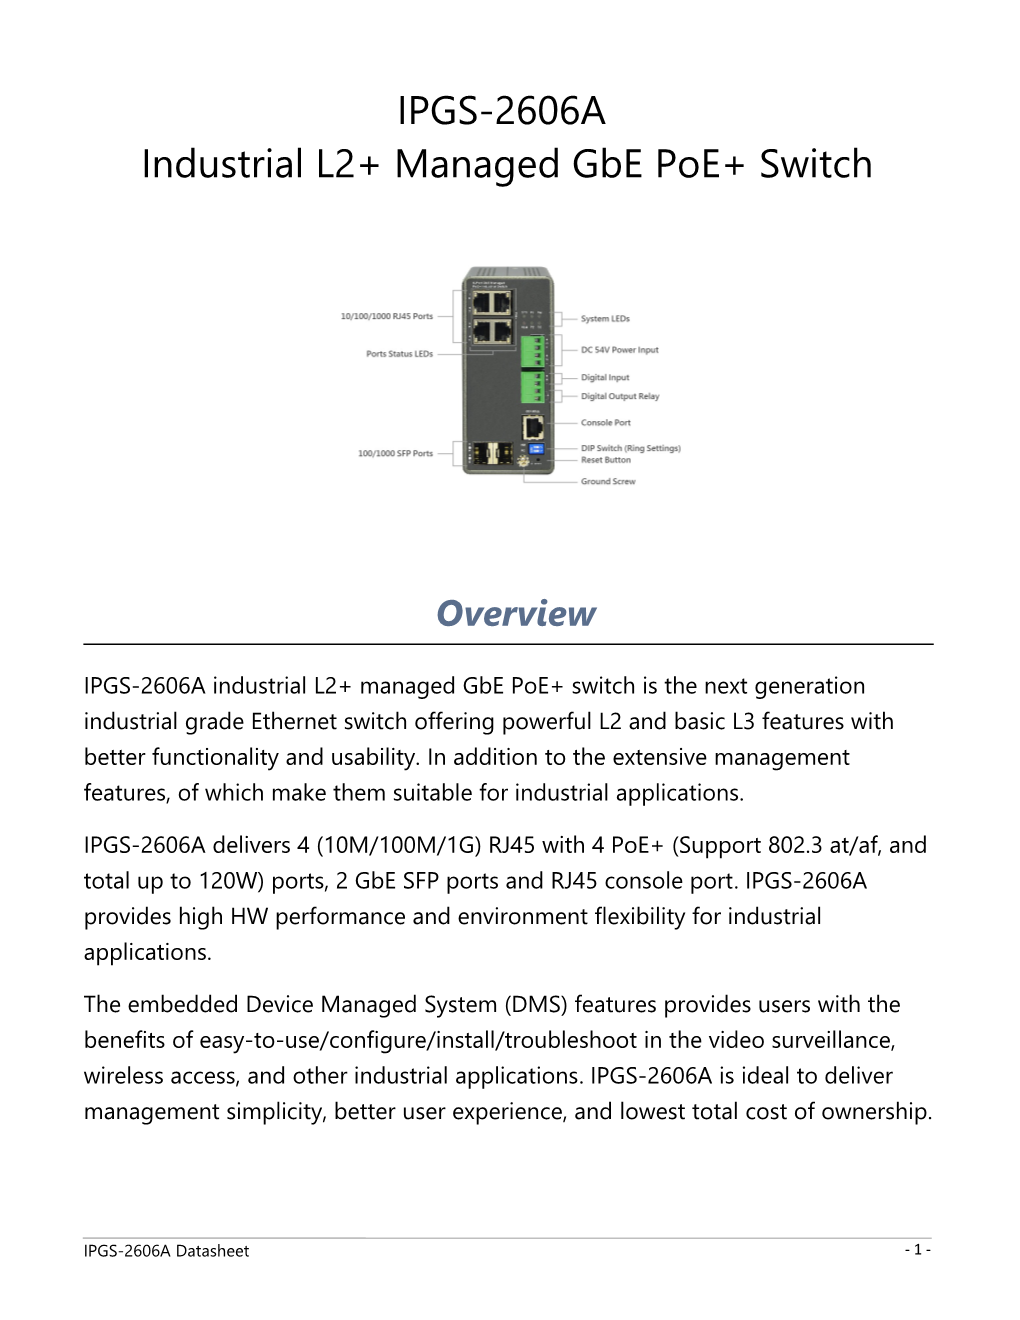 Industrial L2+ Managed Gbe Poe+ Switch